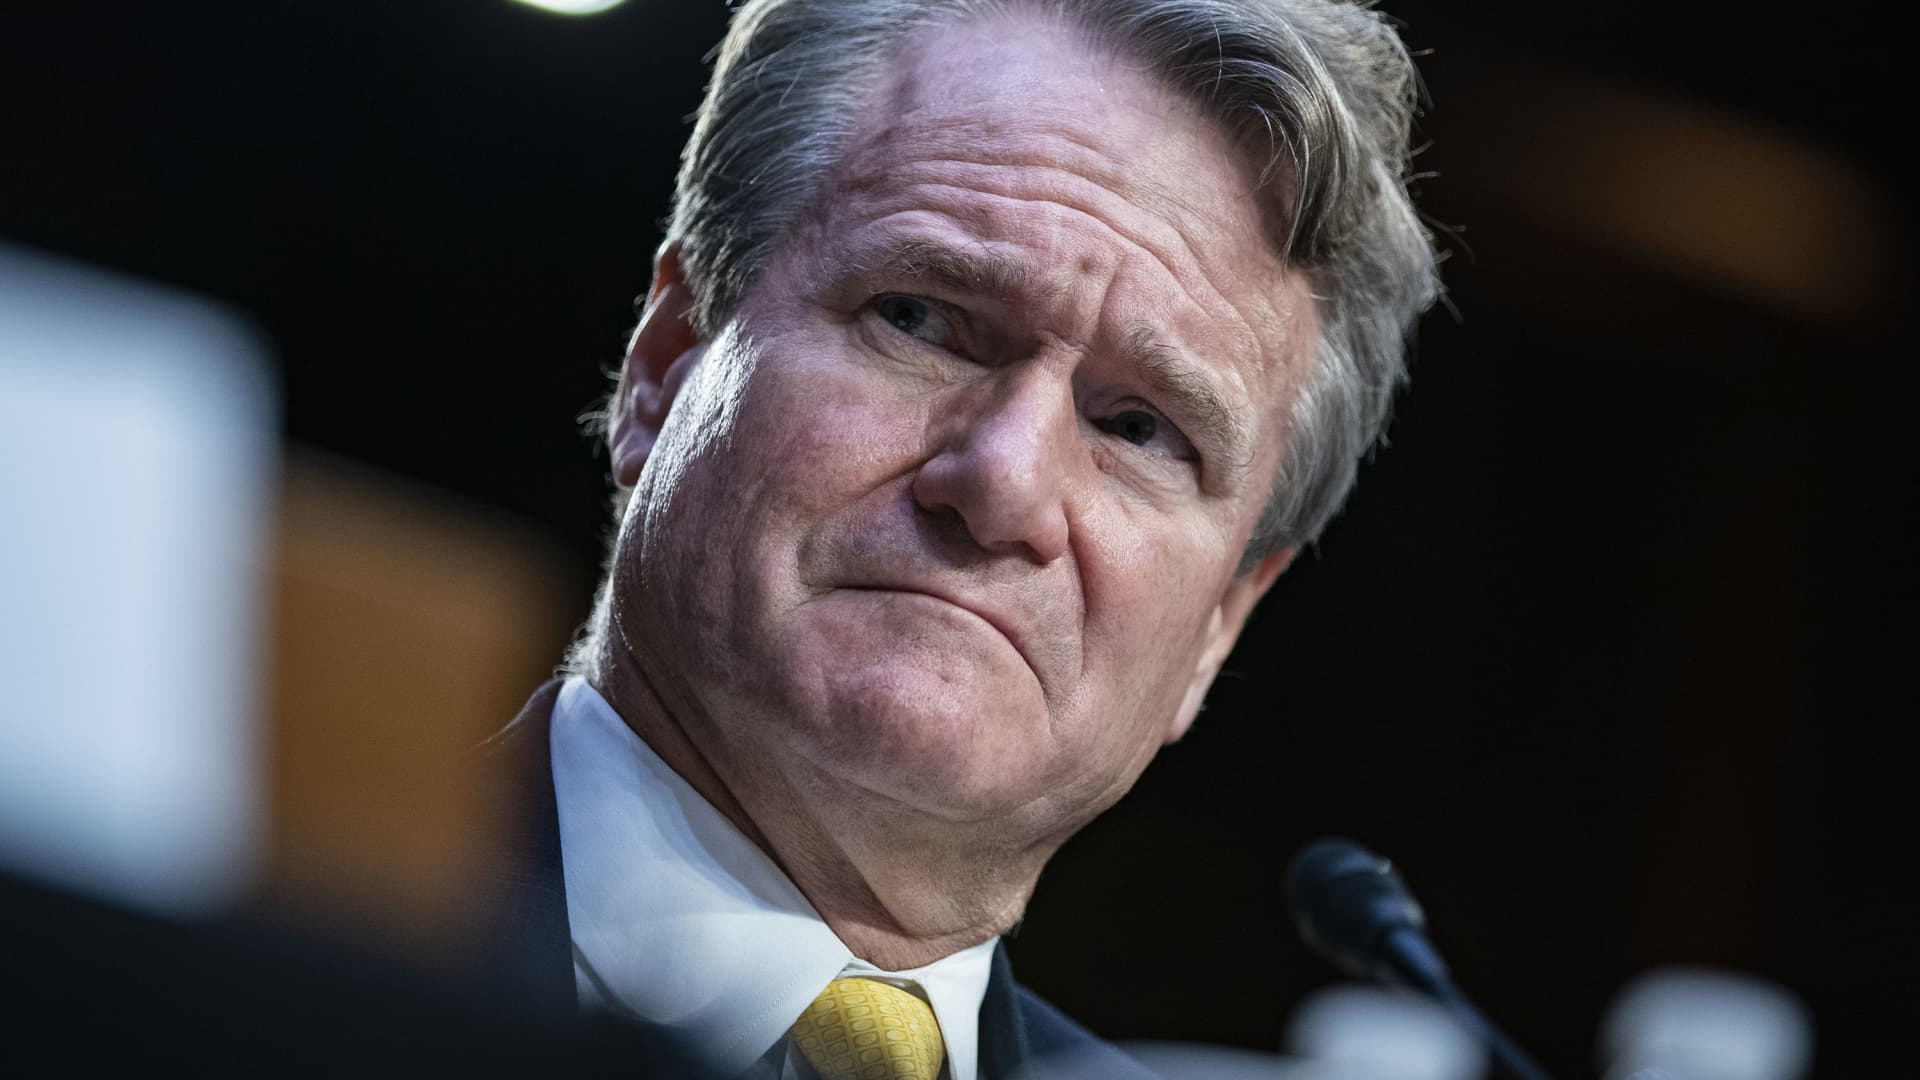 Brian Moynihan says Bank of America expects ‘mild recession’ and is preparing for worse